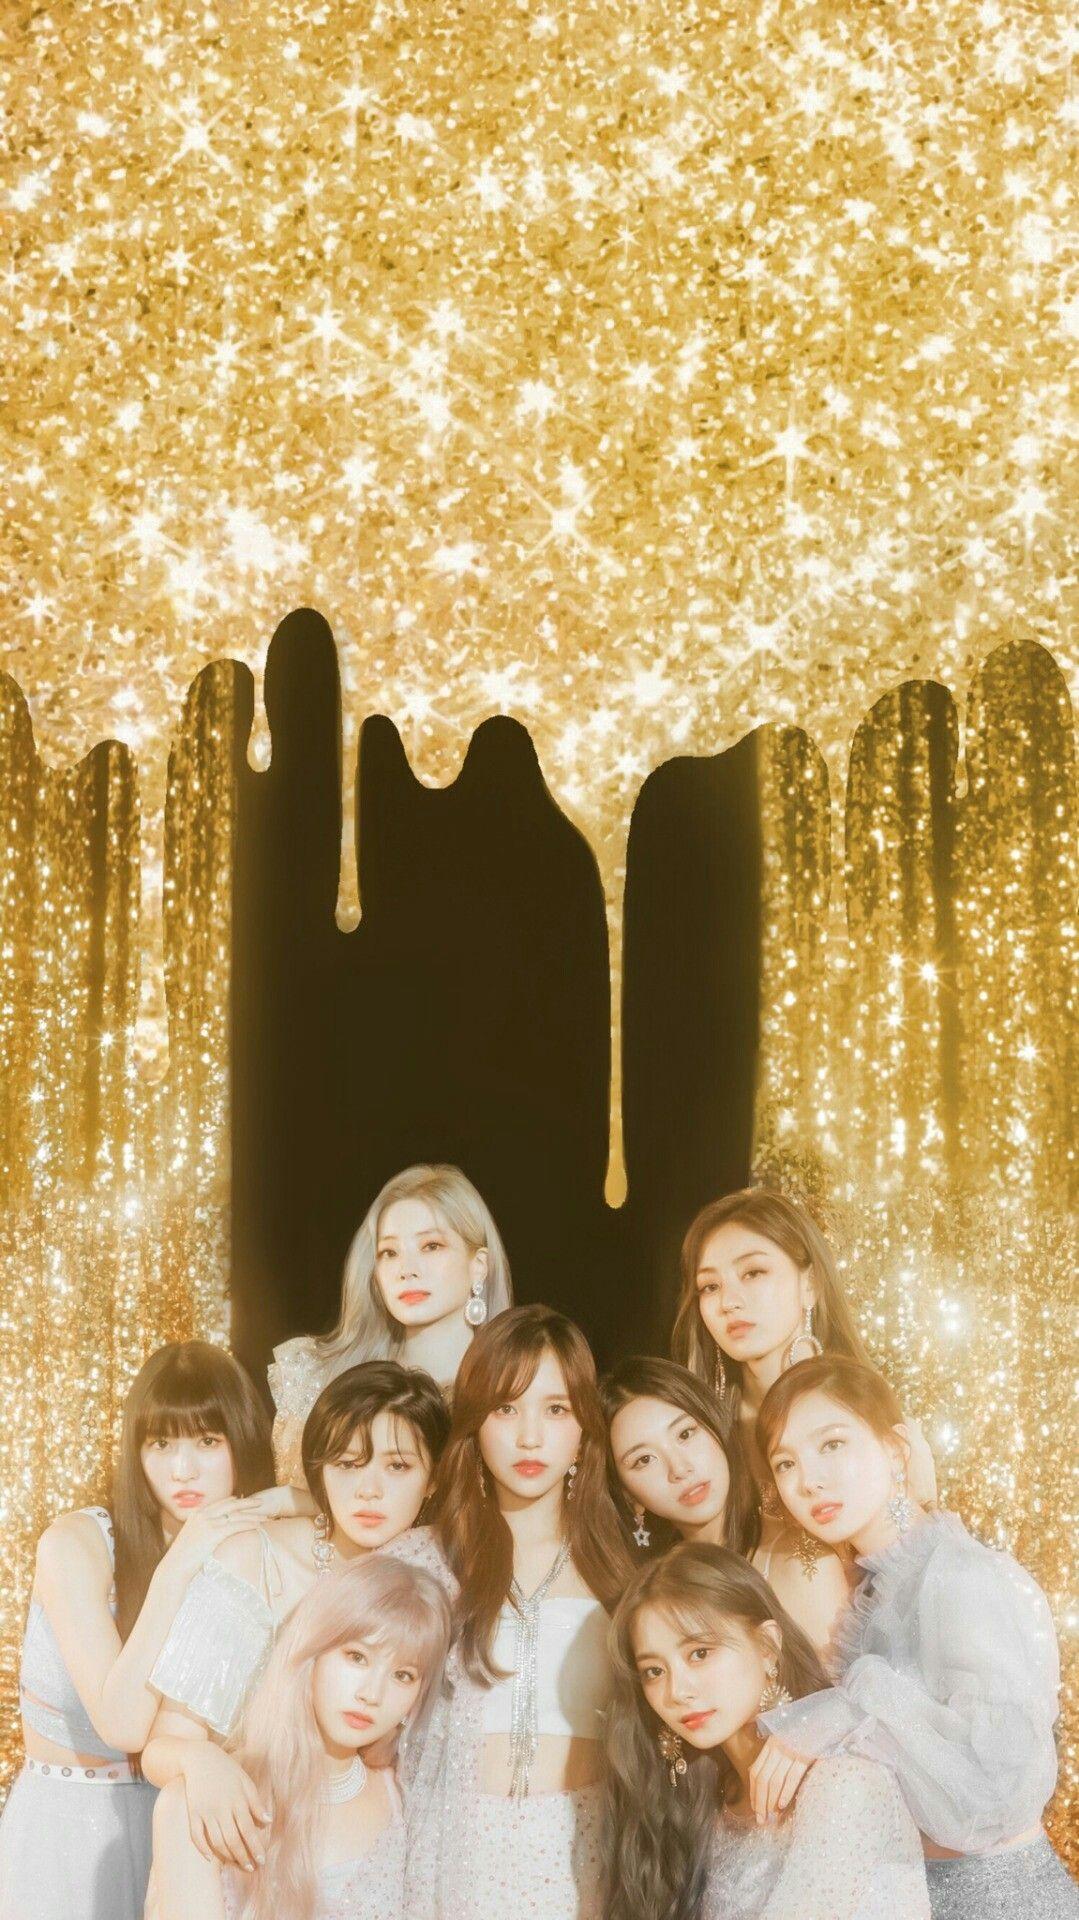 Twice 4K HD Wallpaper 2020 (트와이스) for Android